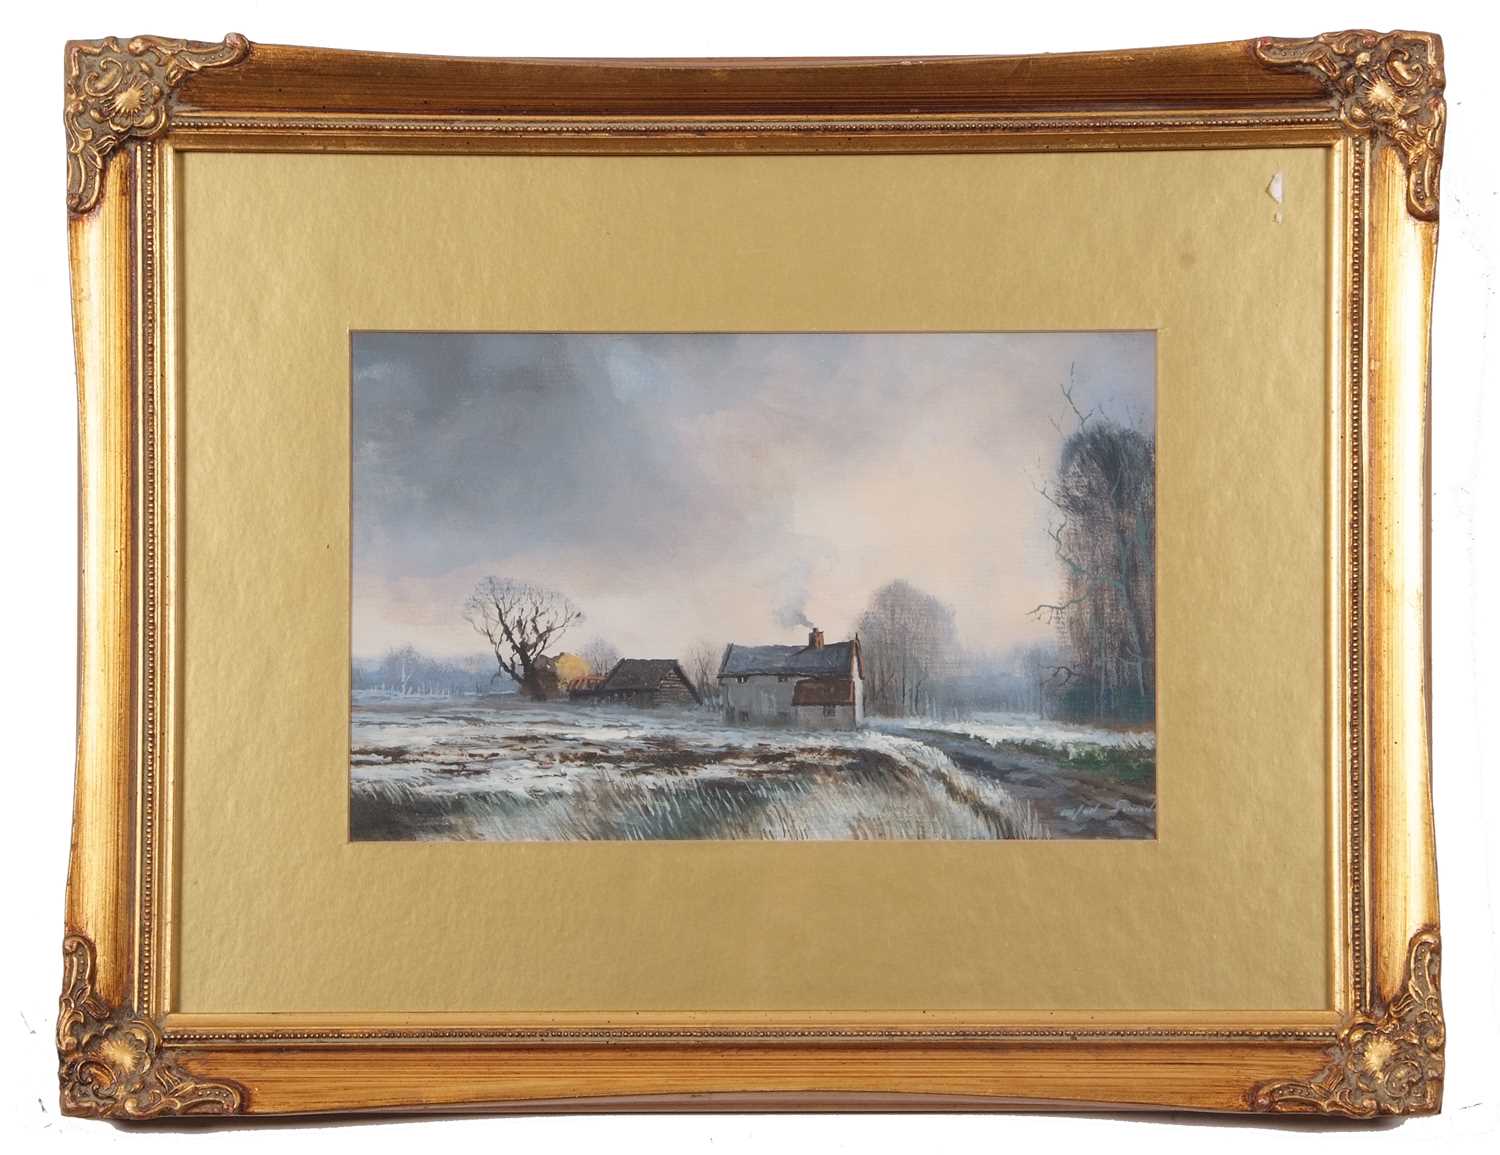 Alfred W. Saunders (British,1908-1986), "Depth of Winter", oil on board, signed, inscribed on